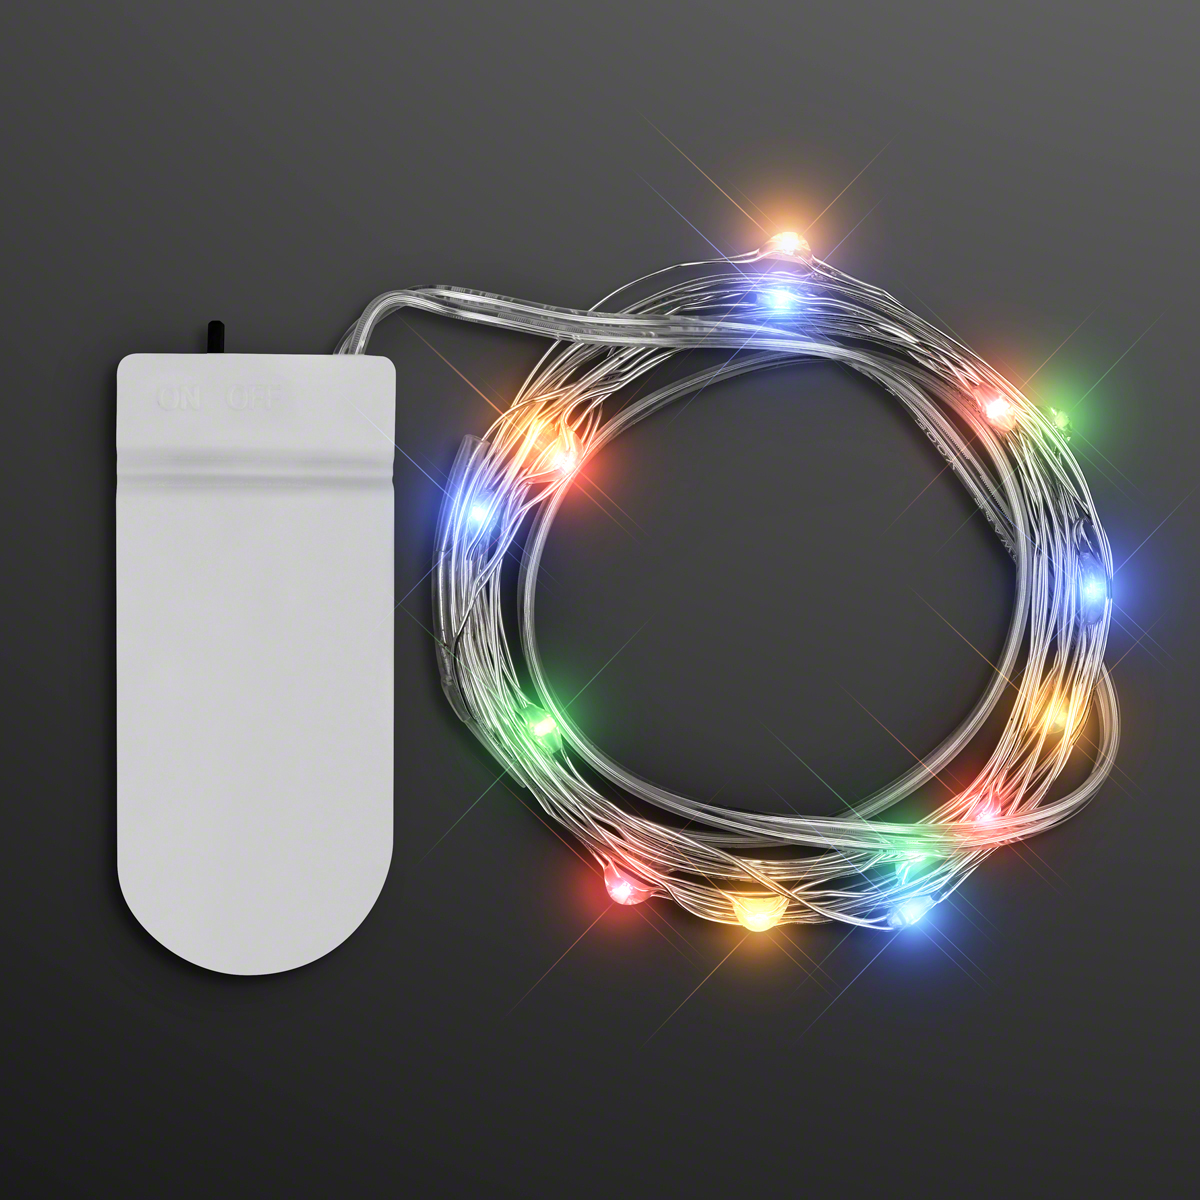 25+ Single Led Lights For Crafts - WahhebPippa